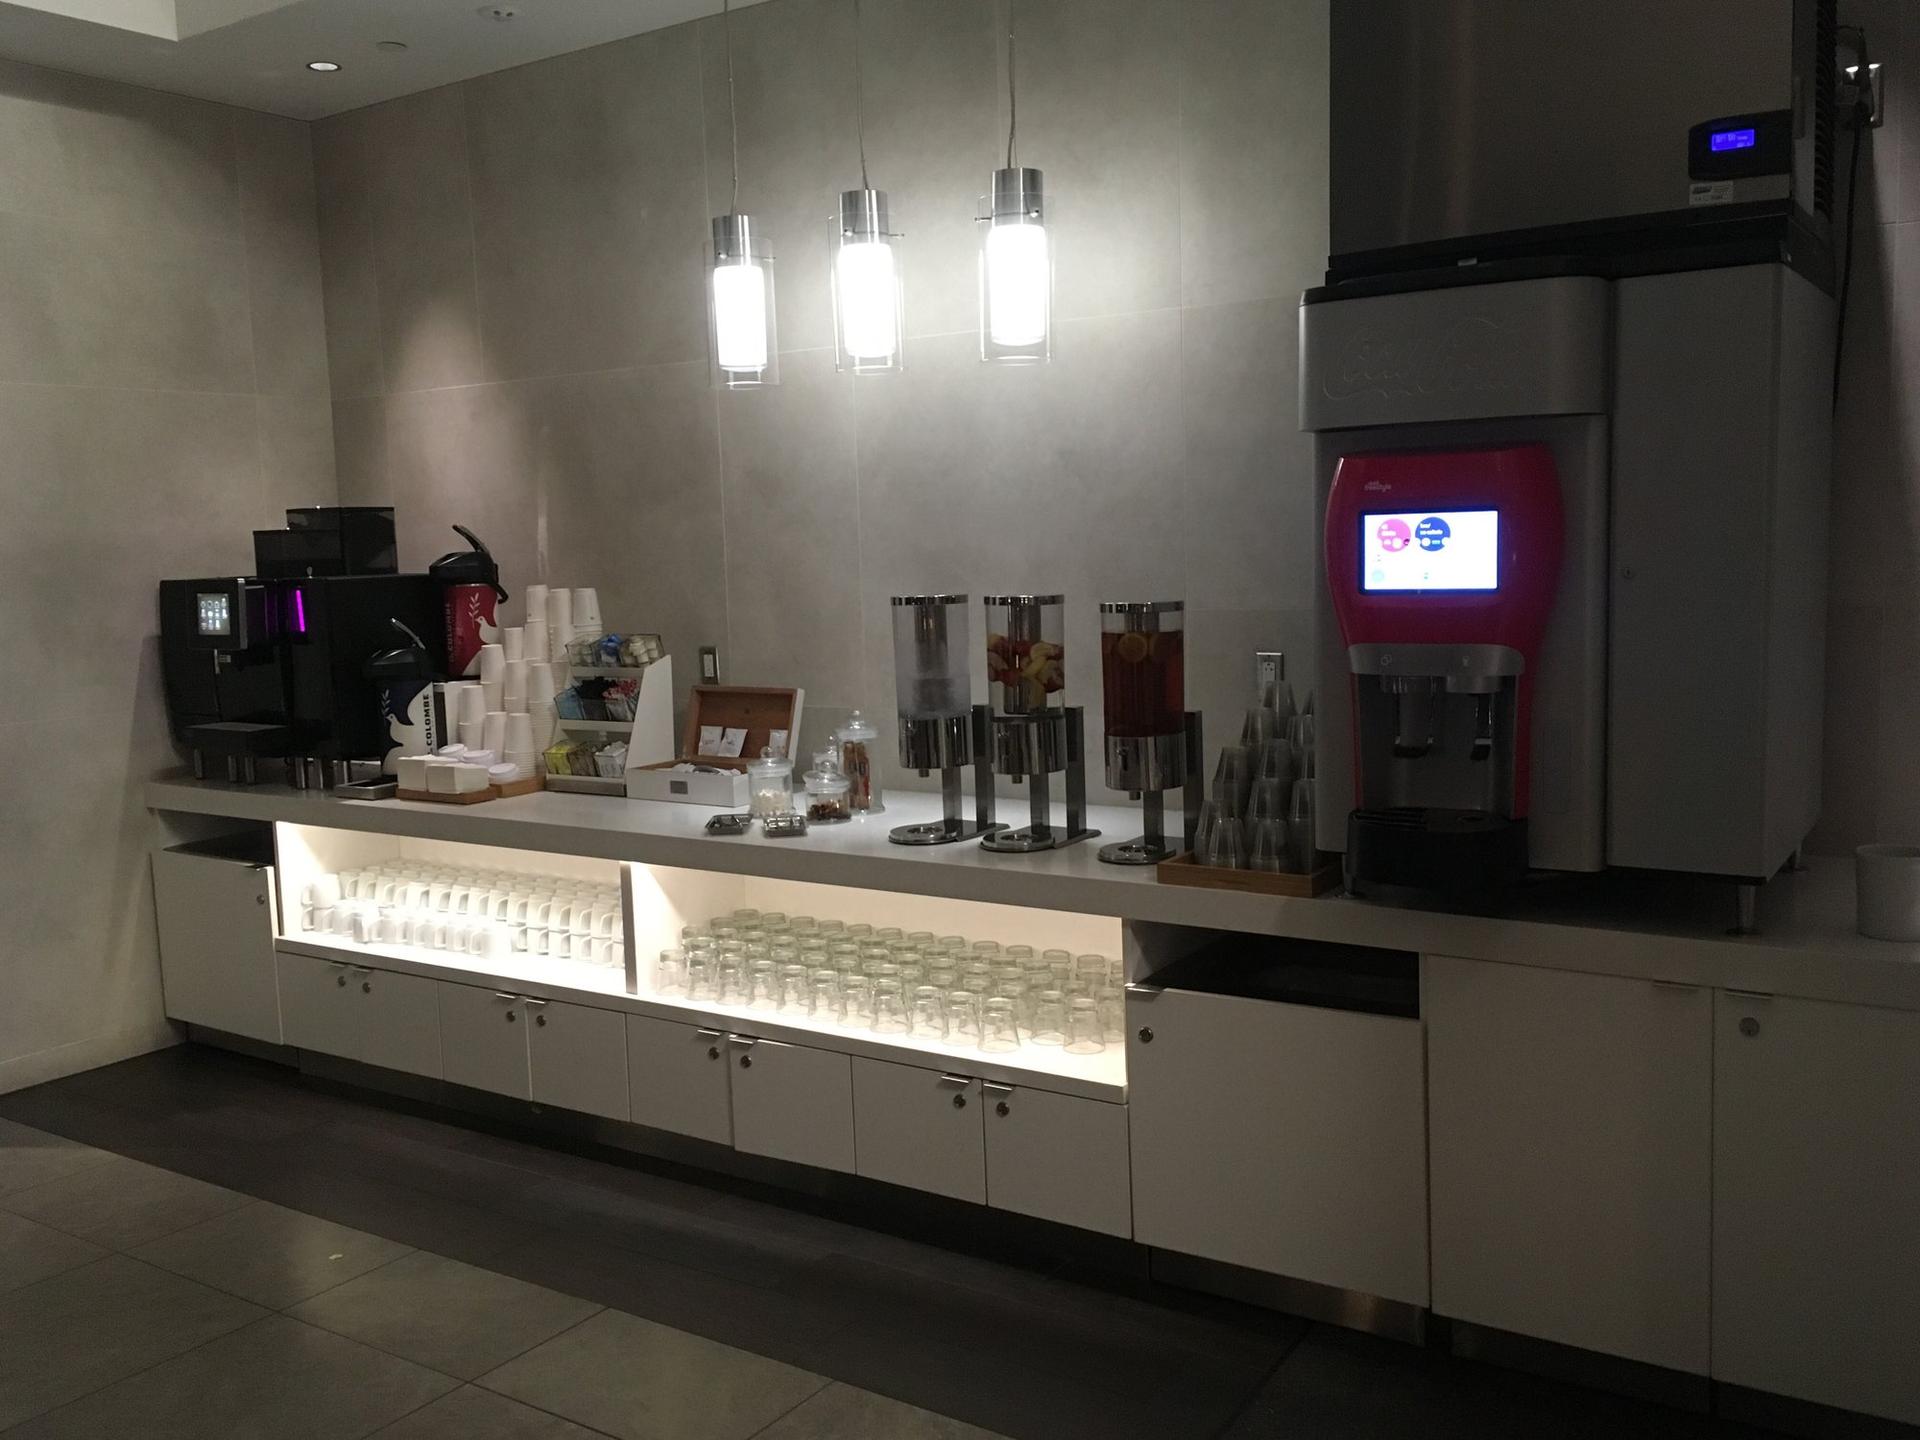 American Airlines Flagship Lounge image 35 of 65